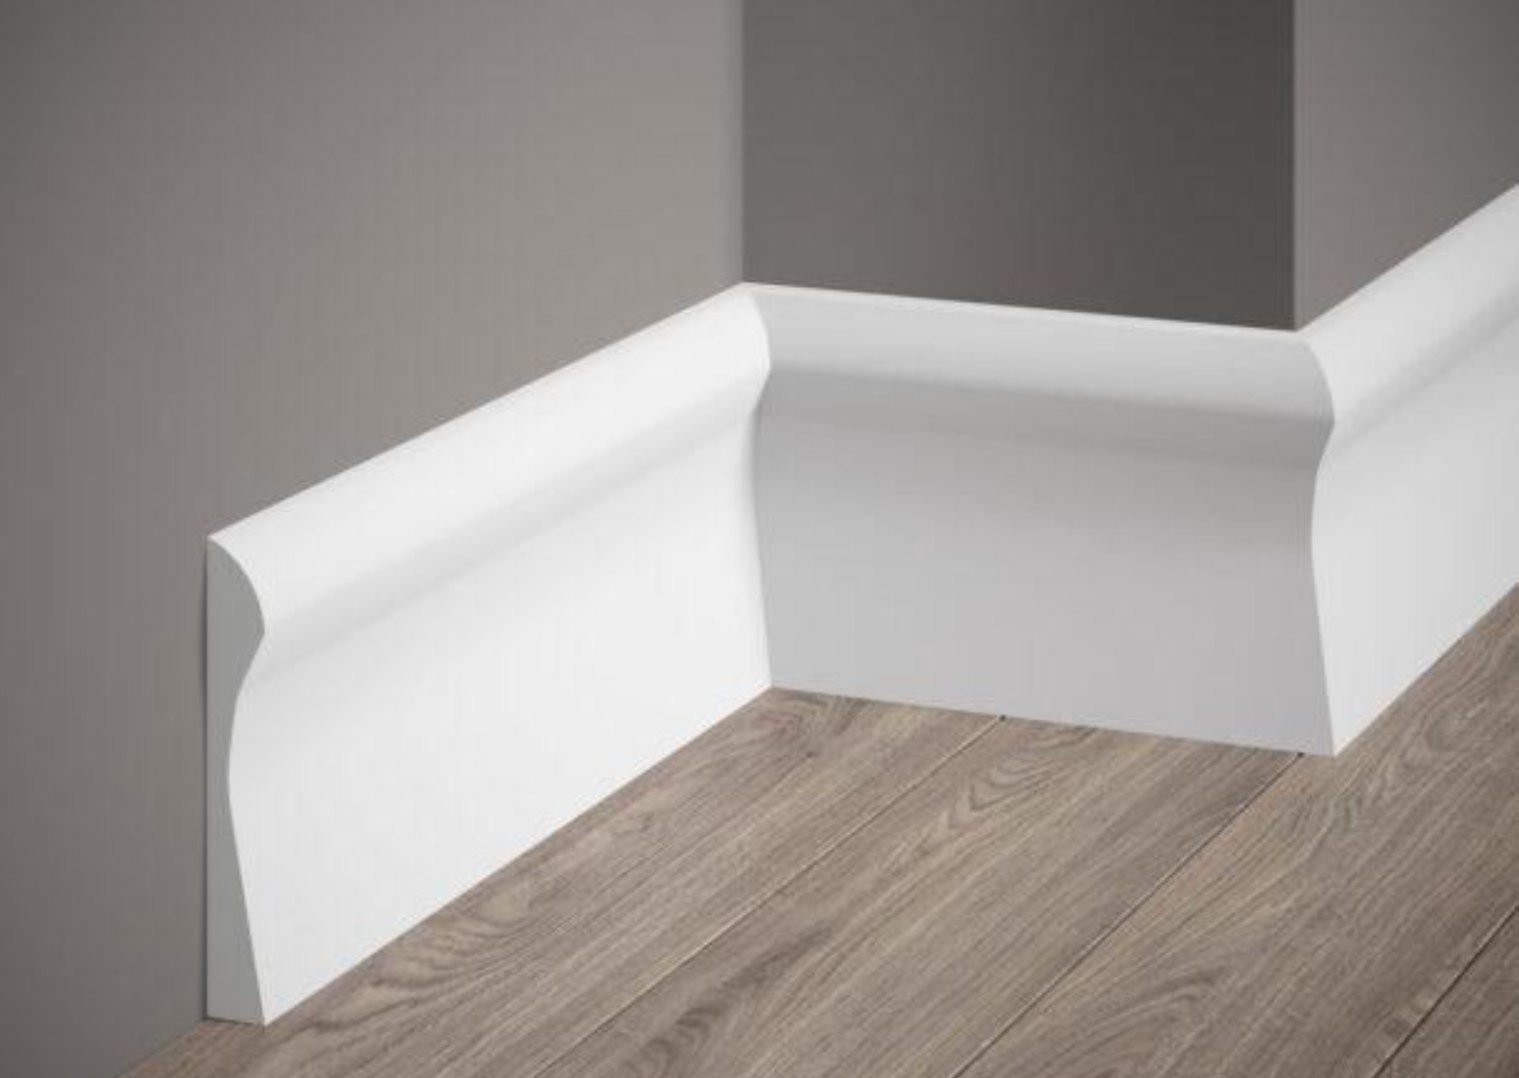 Factors to Consider When Buying Skirting Boards